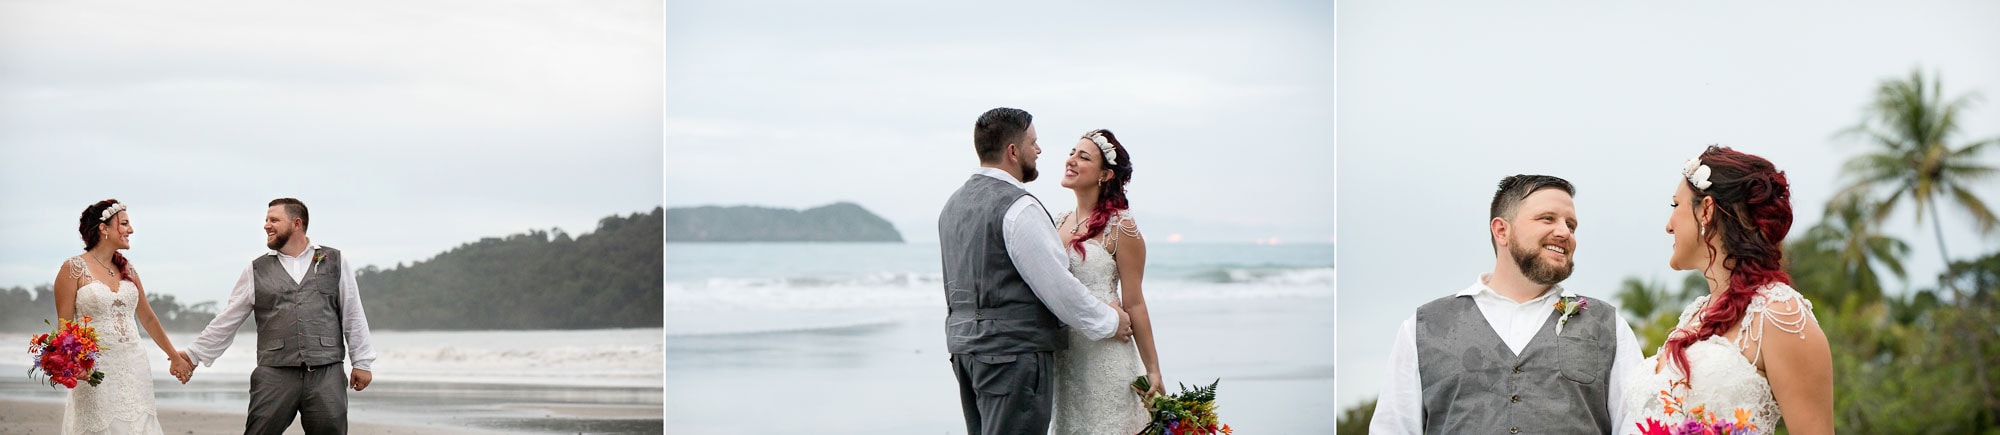 Bridal portraits on the beach in between the raindrops